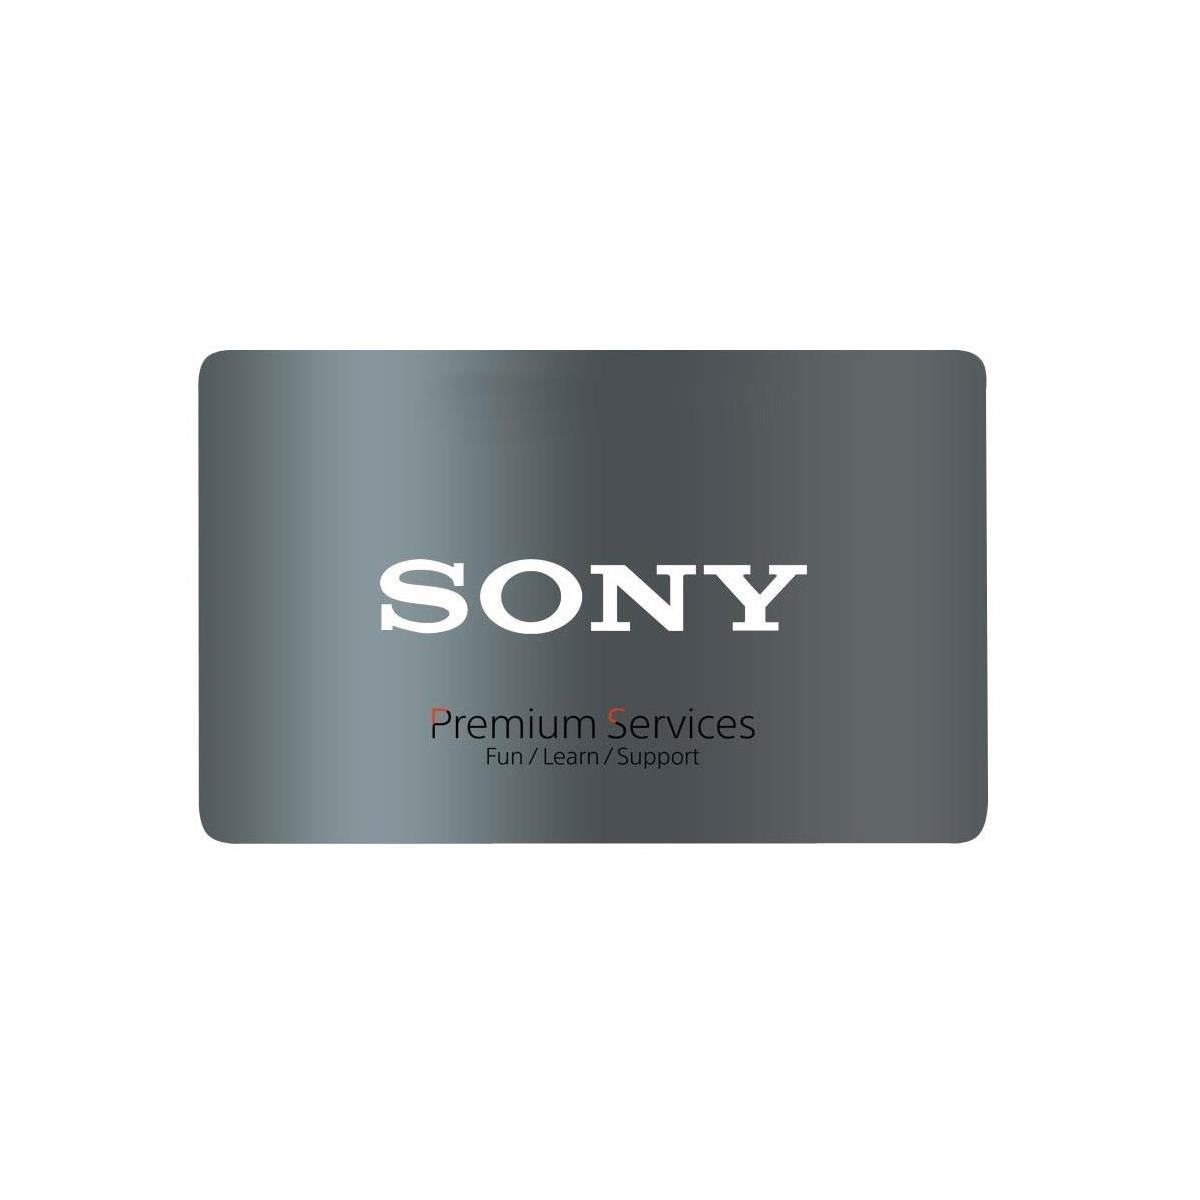 Sony Protect Plus Commercial Warranty for Cameras/Lenses Up To $1500, 3 Yr Plan -  1040110931